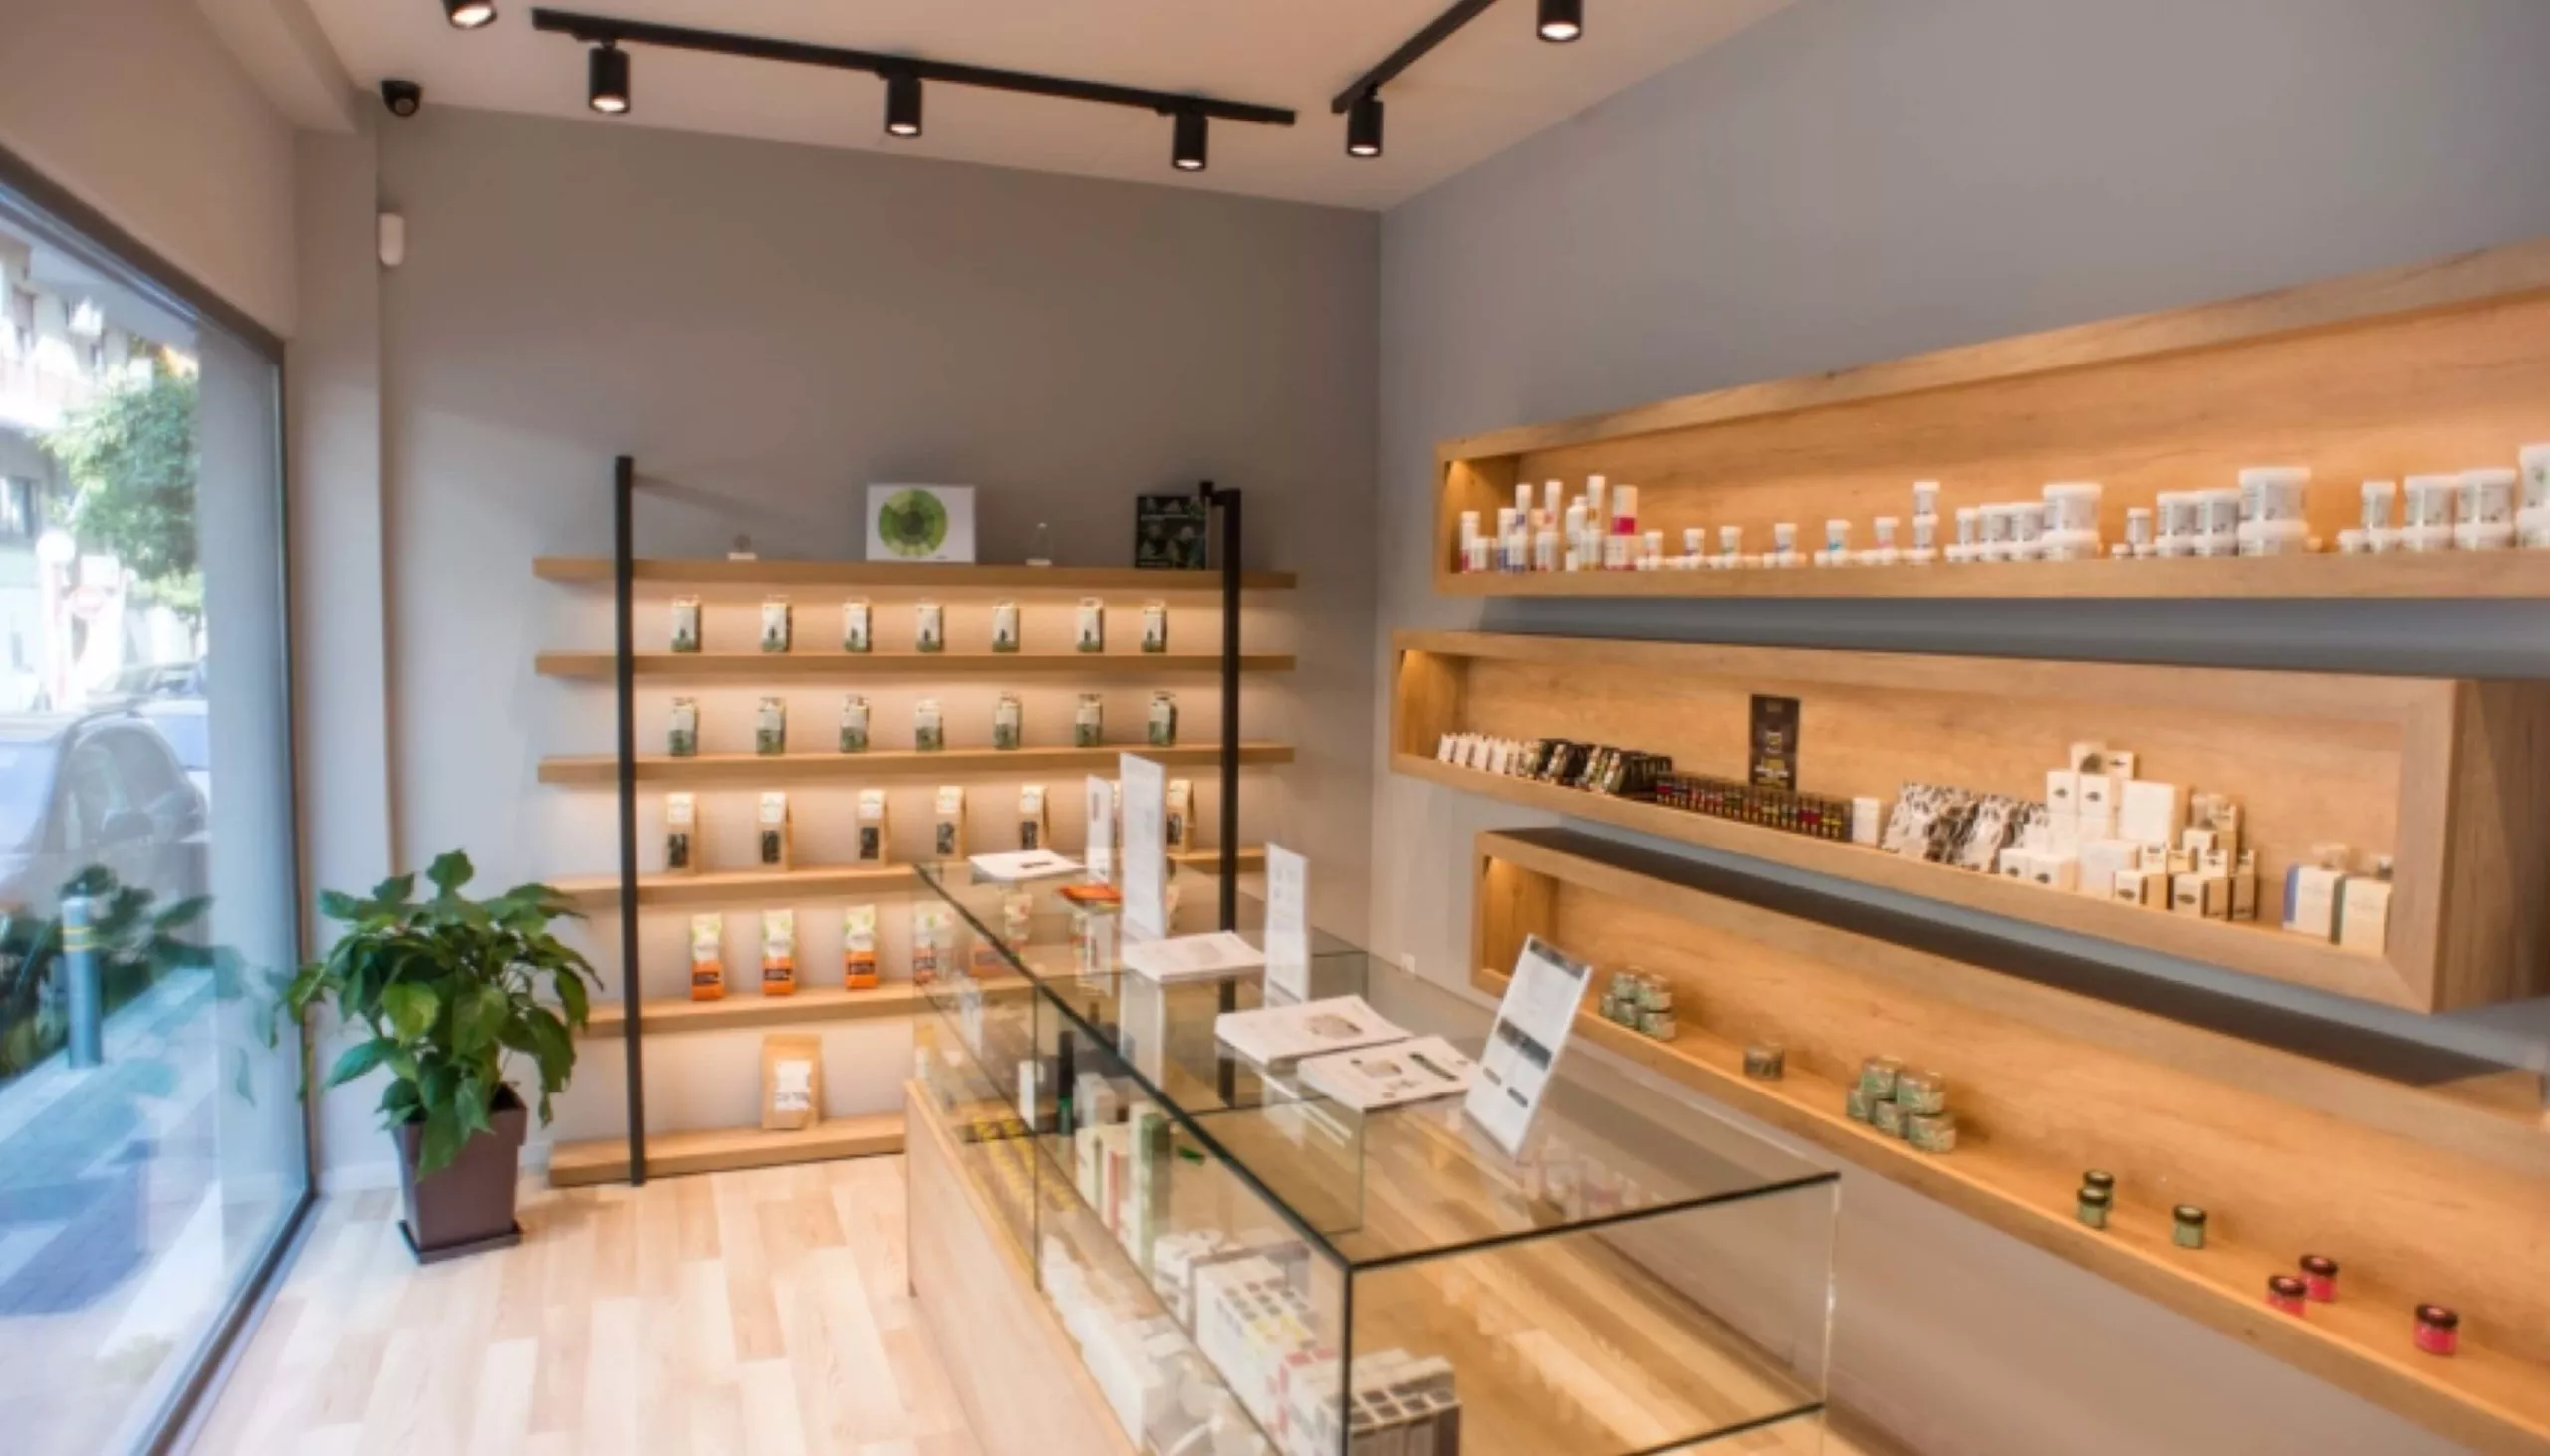 CBD Wood Shop Nice Barla in France, europe | Cannabis Products - Rated 5